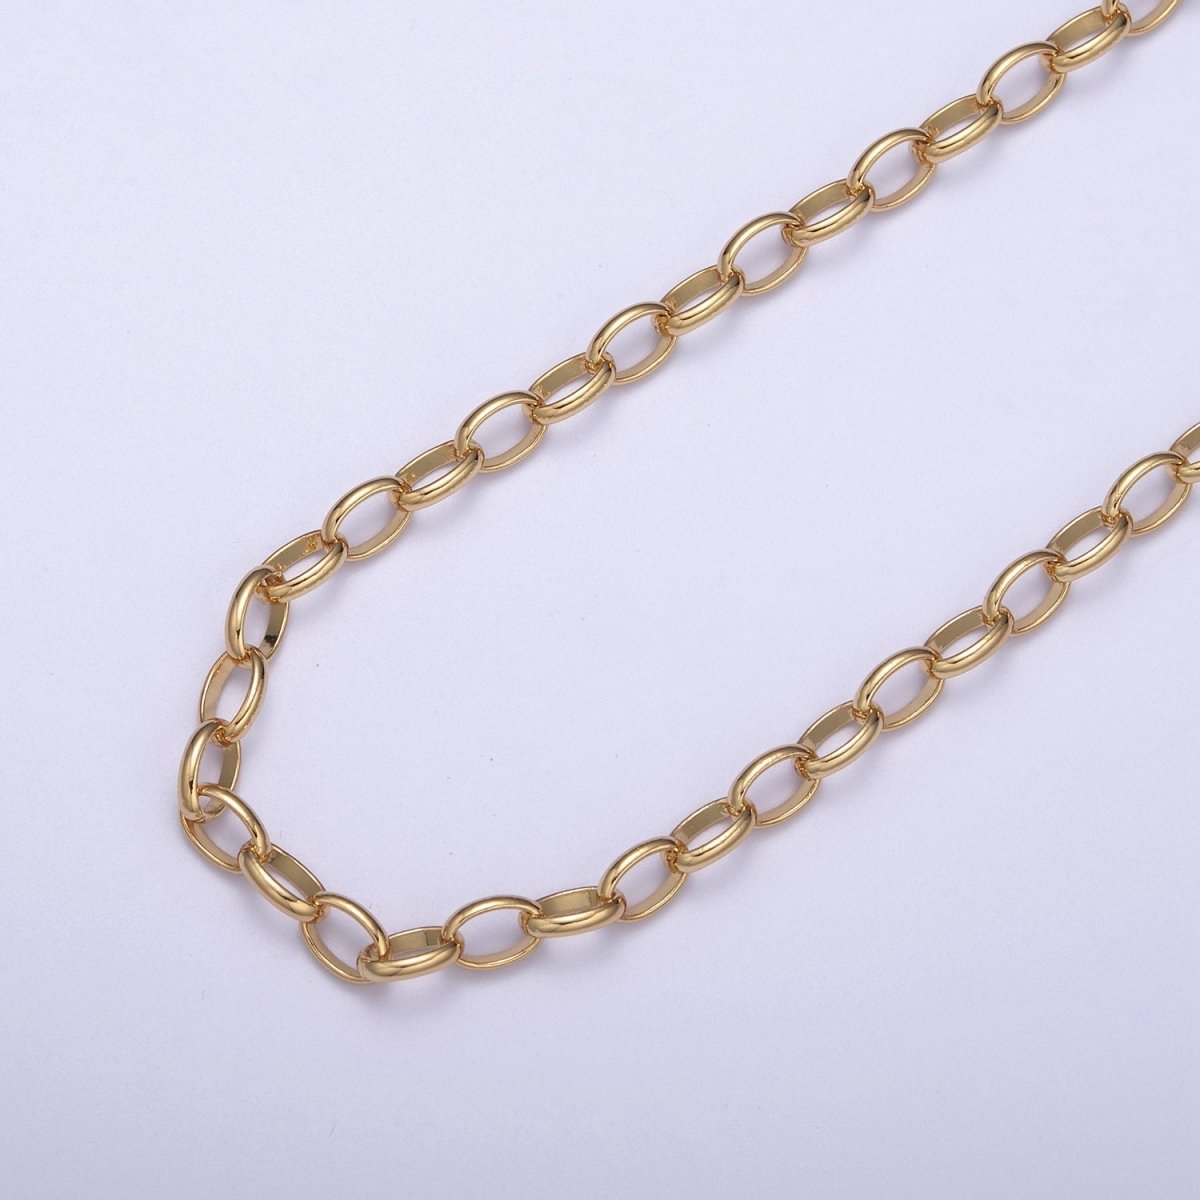 24K Gold Filled ROLO Cable Chain, Unfinished 7X5mm Oval Cable Chain in Gold & Silver, Unfinished Chain For Jewelry Making | ROLL-662, ROLL-663 Clearance Pricing - DLUXCA